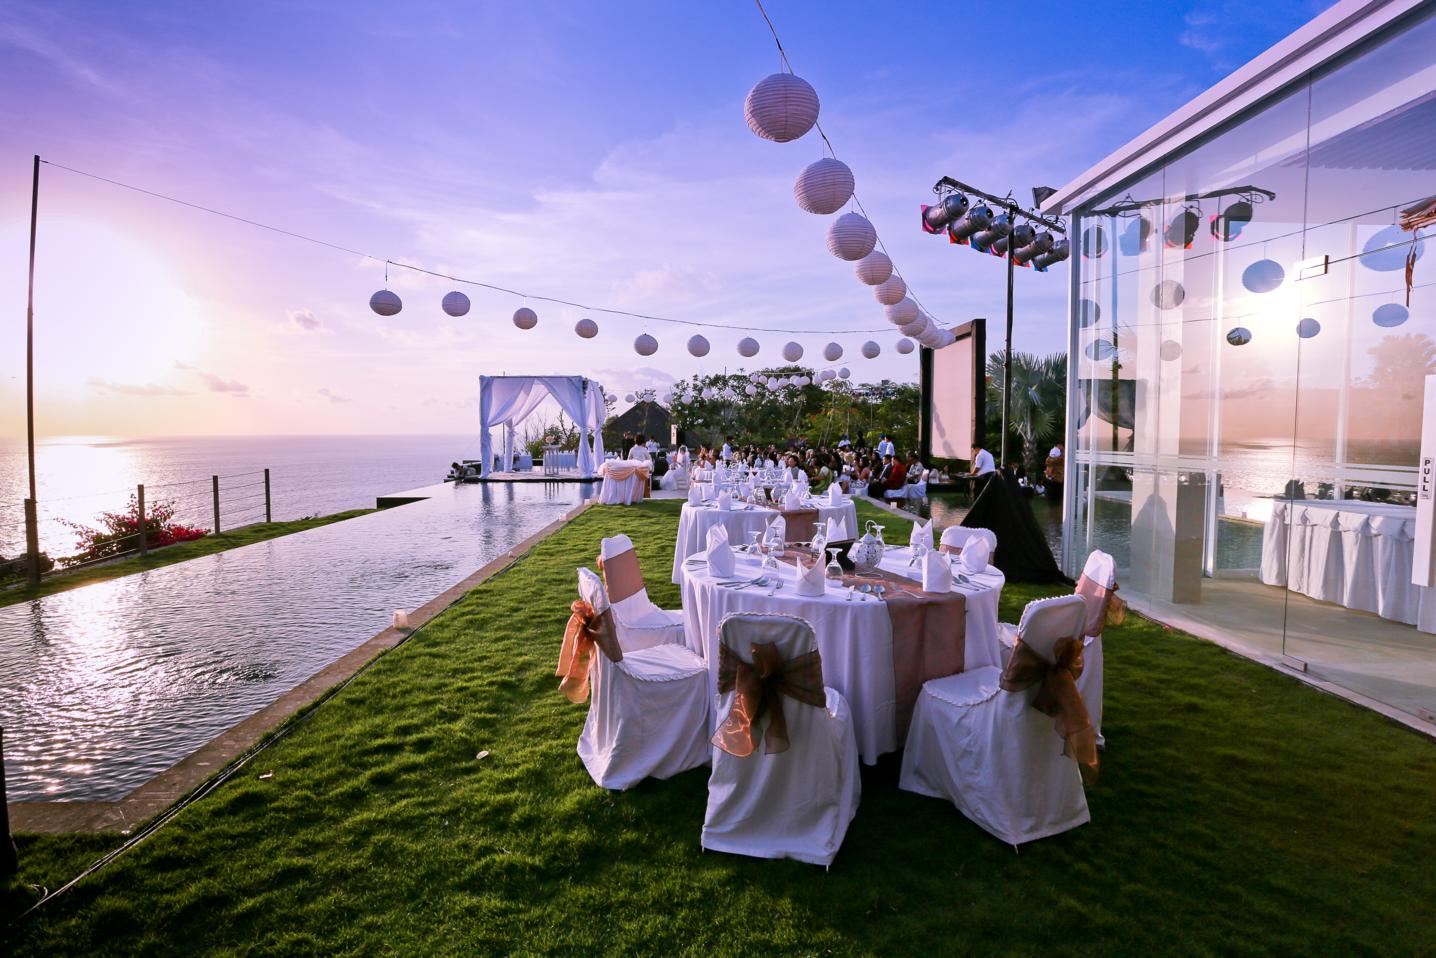 Start Planning A Wedding Venue and Location Right Now!